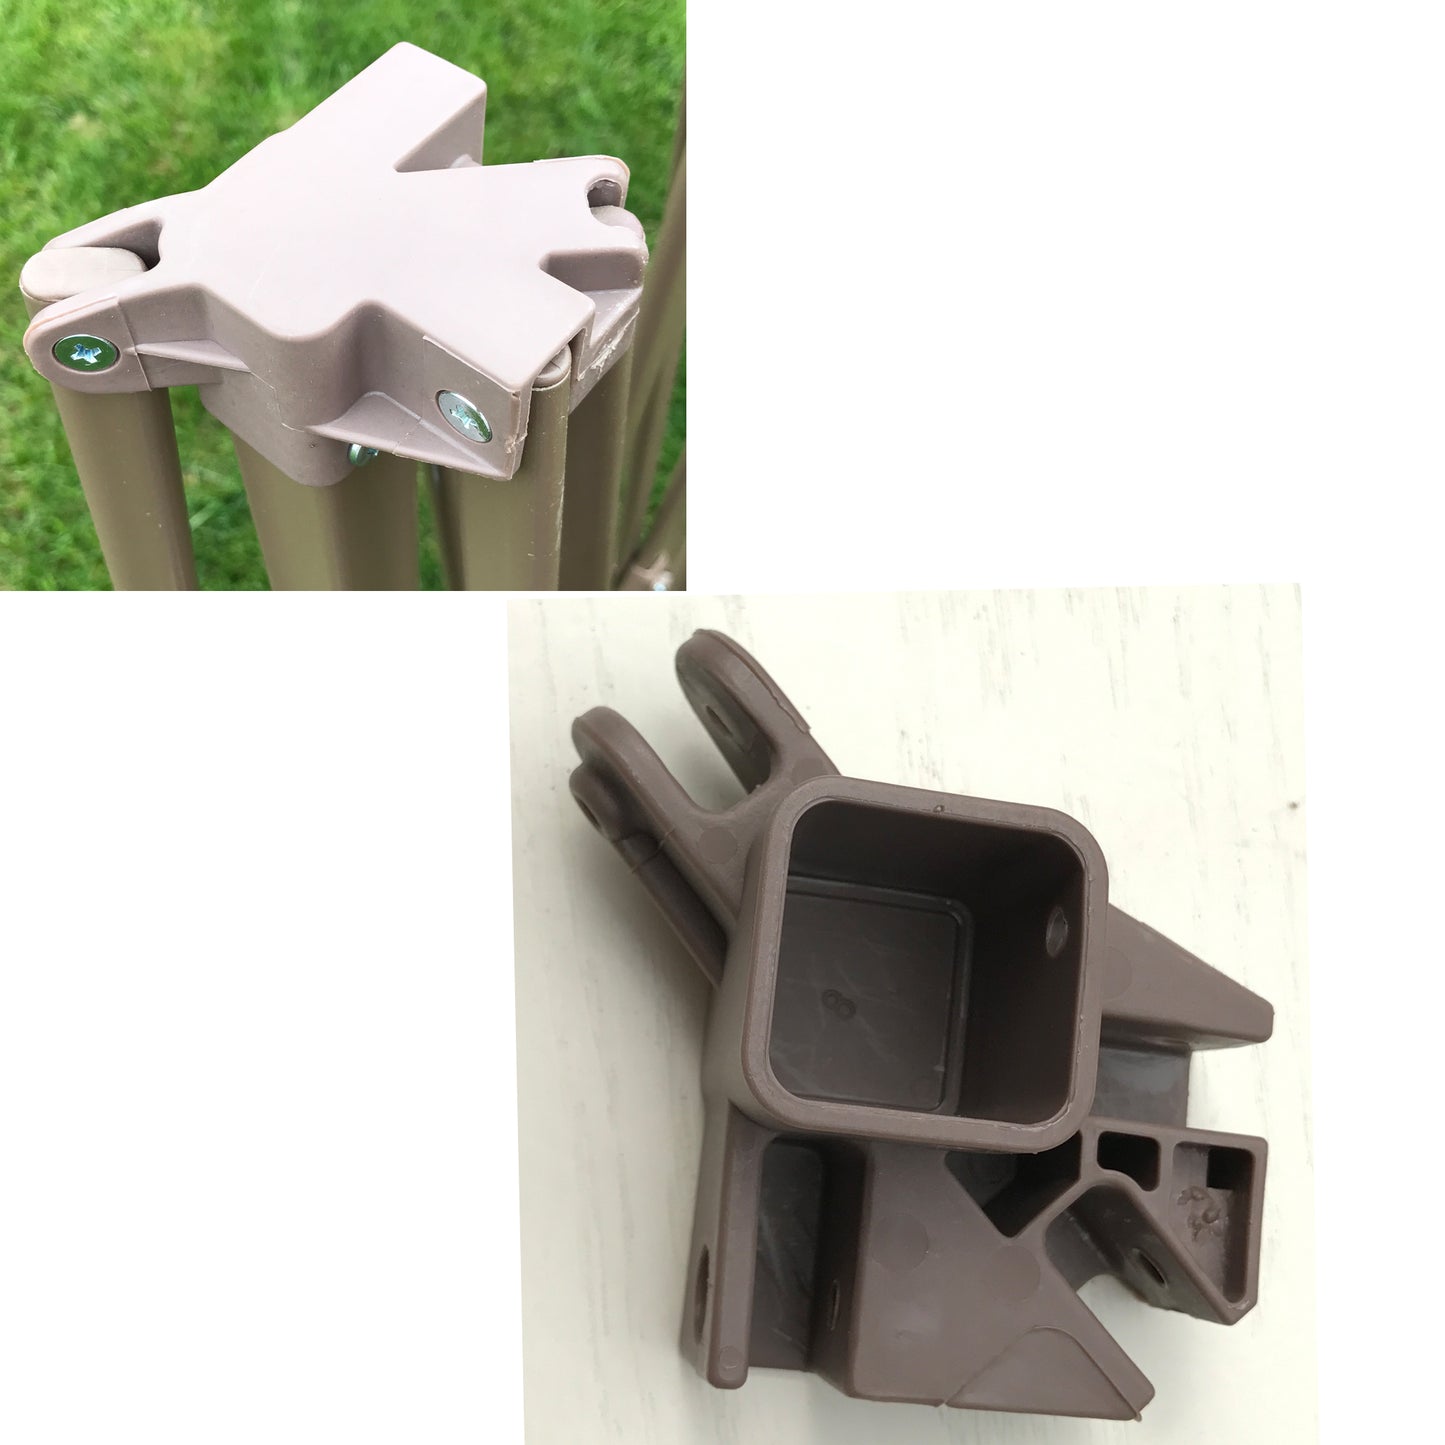 In this photo, you can see the Ozark Trail and Chapter 13 x 13 Pagoda Canopy Gazebo Leg Bracket CAP Connector Replacement Part. This crucial component is designed to maintain the structural integrity and stability of your canopy, ensuring a reliable and secure outdoor shelter.